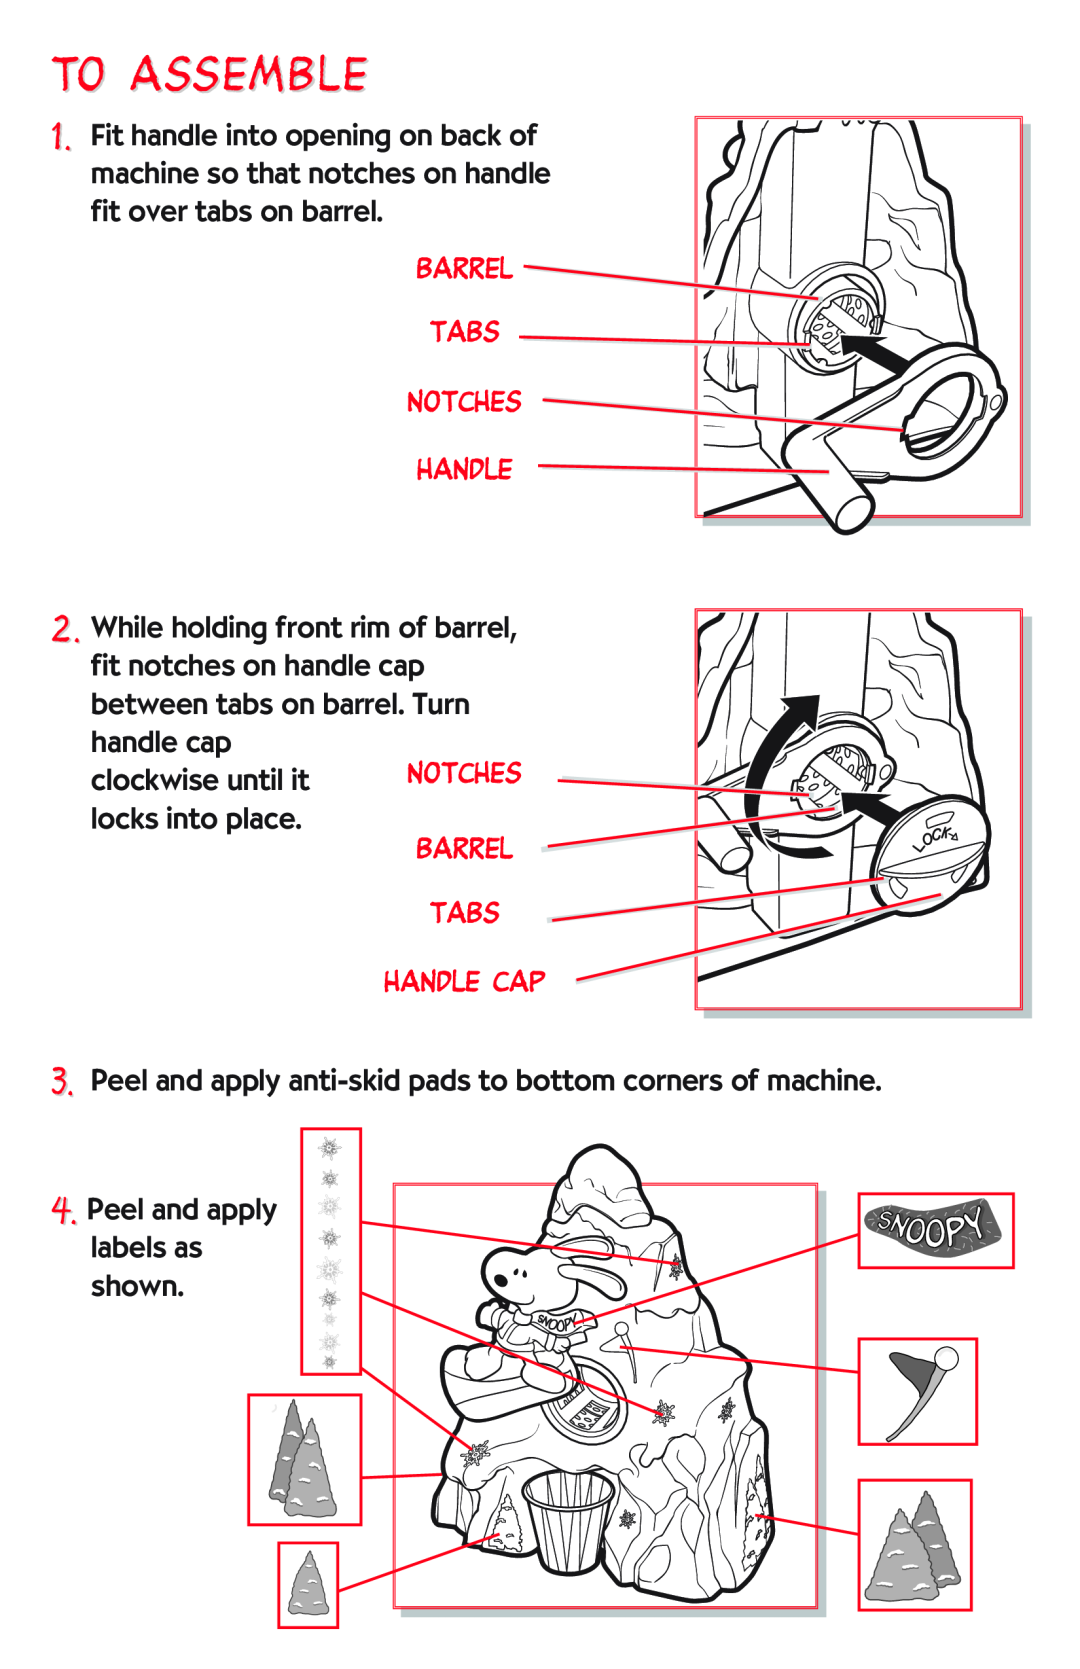 Hasbro 30001 manual To Assemble, handle cap clockwise until it NOTCHES locks into place, Peel and apply labels as shown 